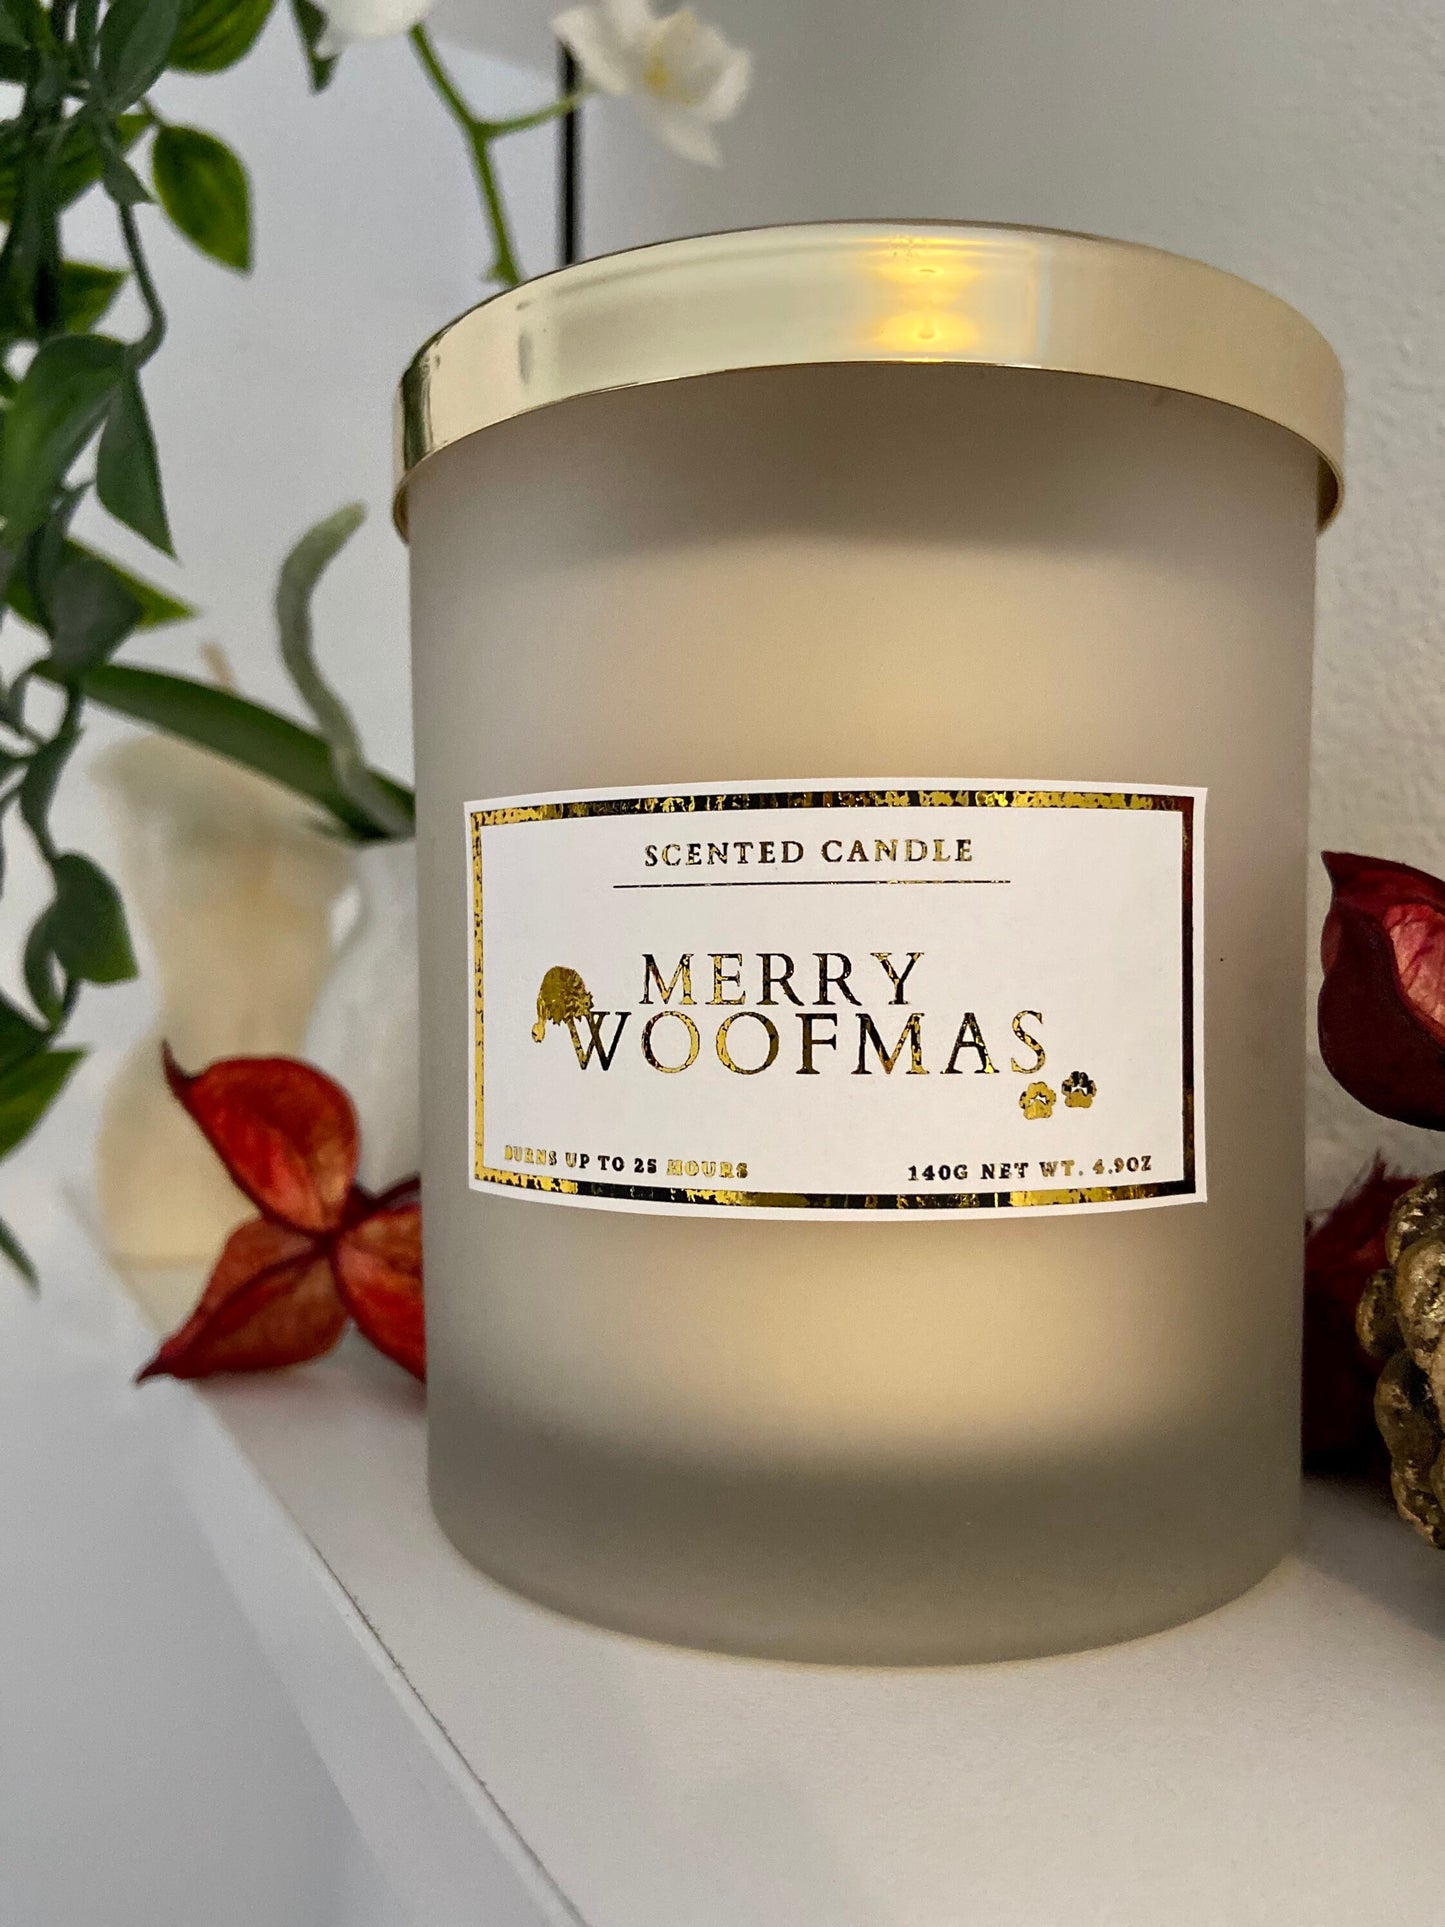 Merry Woofmas Candle